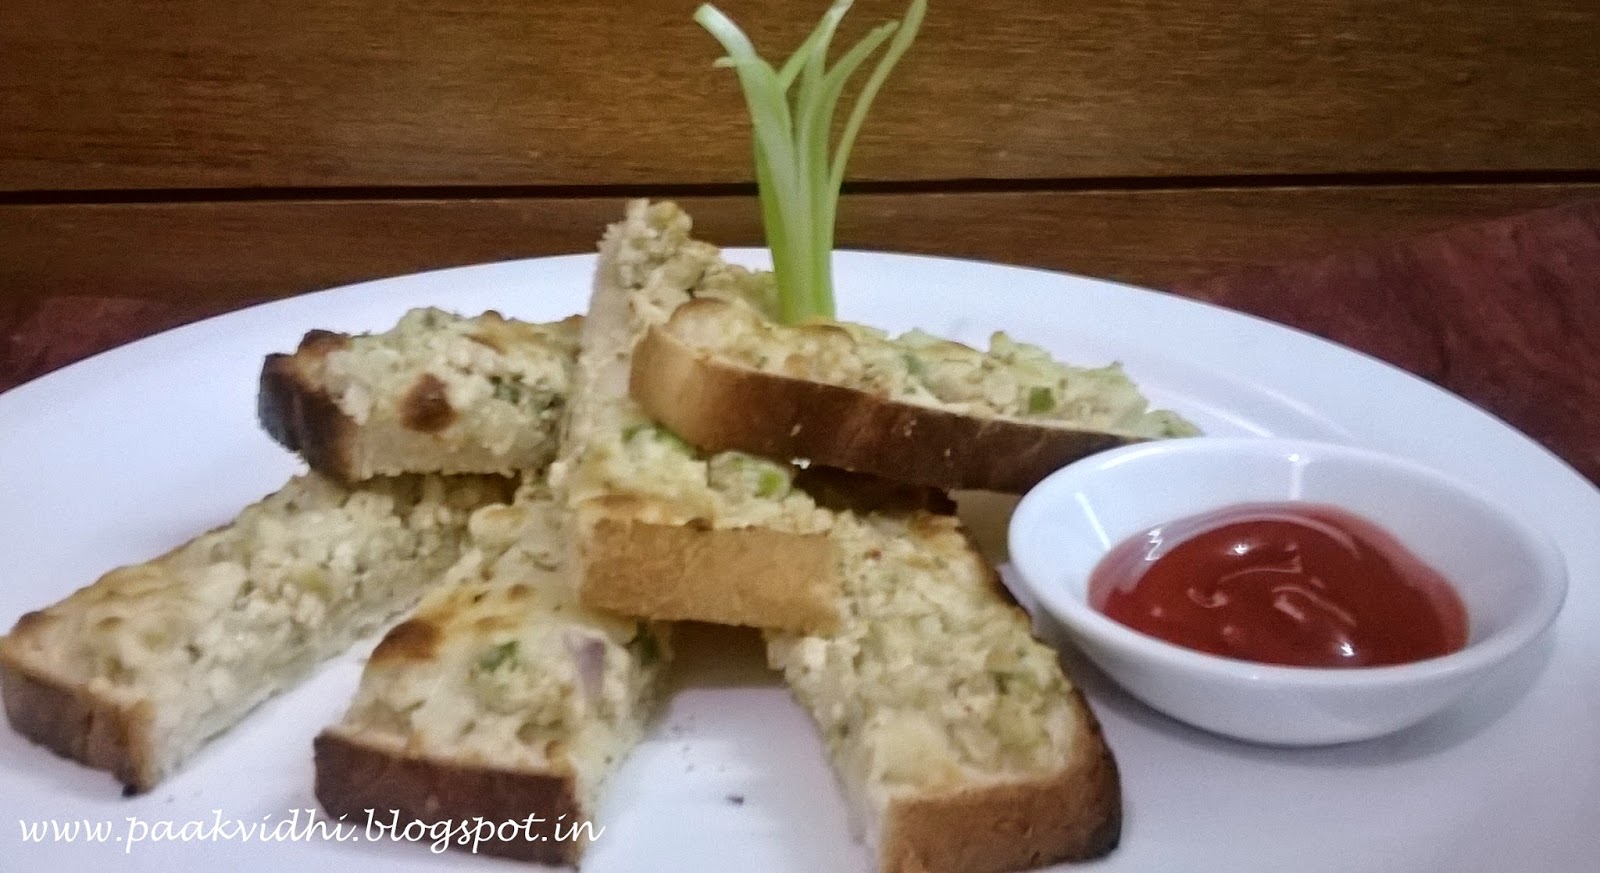 http://paakvidhi.blogspot.in/2014/05/onioncheese-capsicum-fingers.html